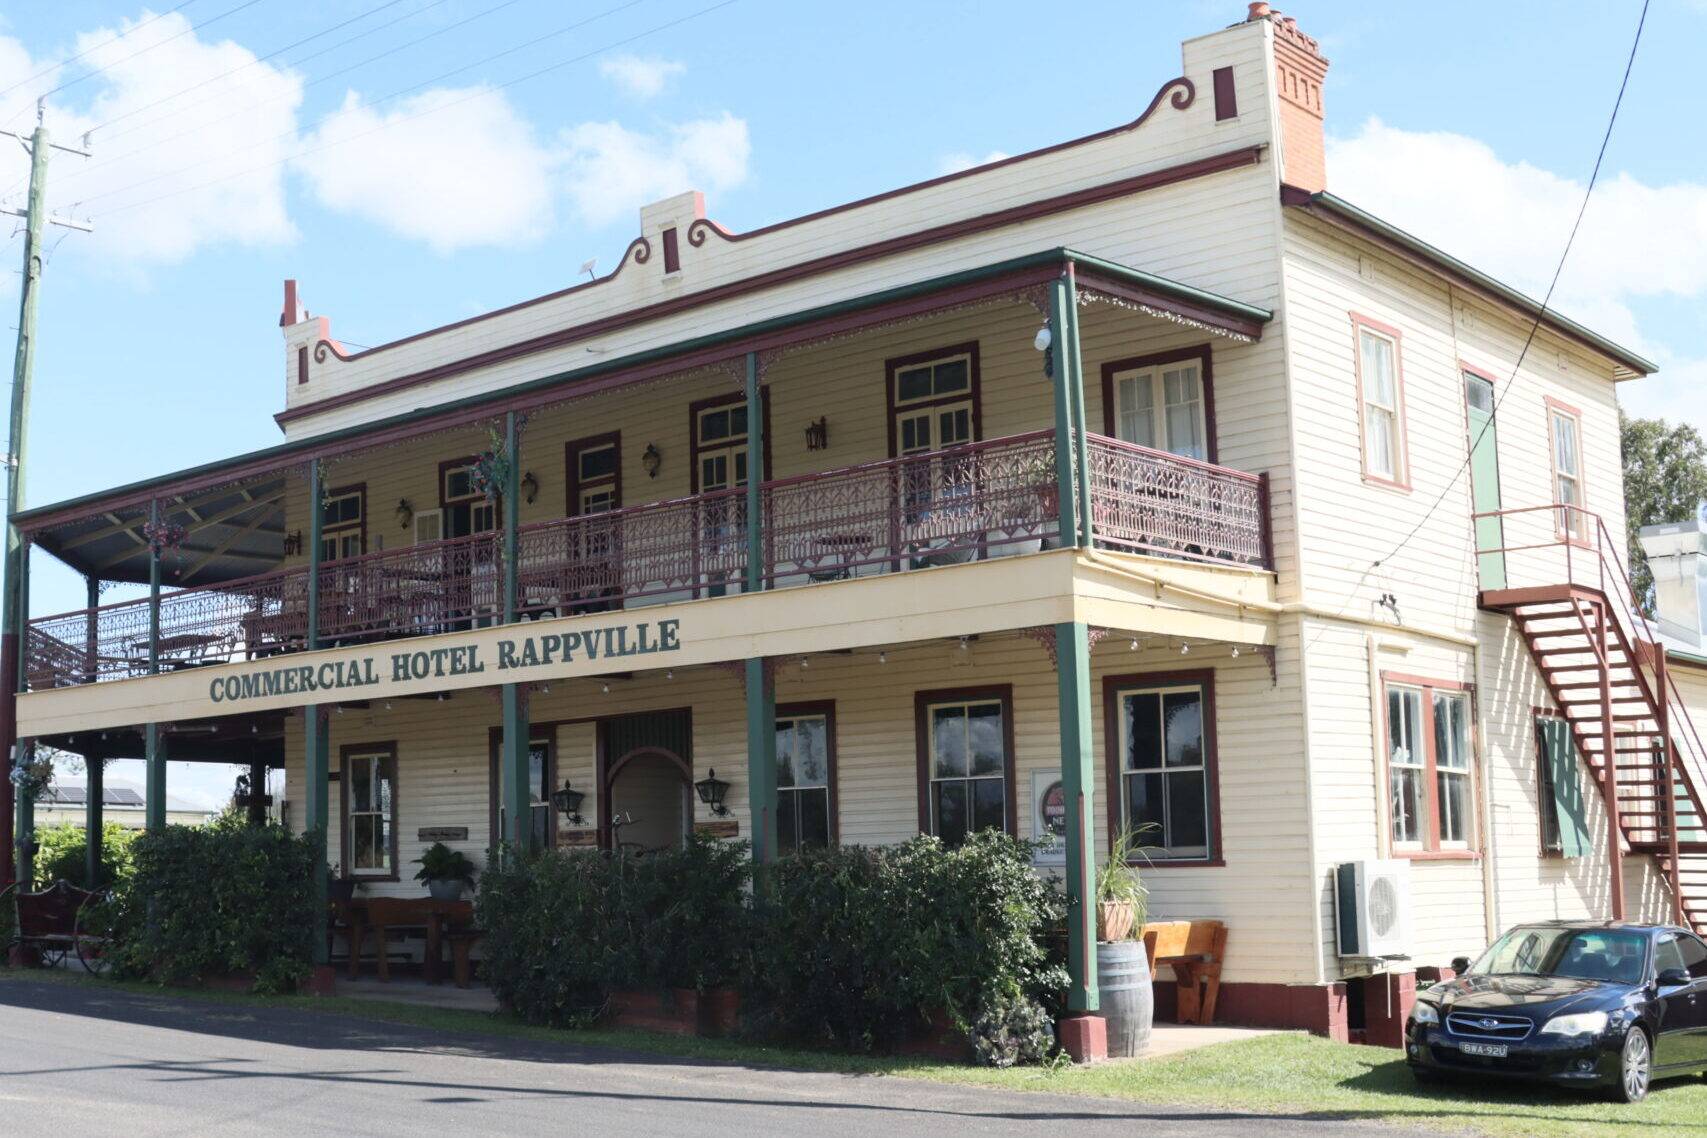 Rappville pub is in a class of its own been two story Timber over 113-year-old heritage listed Hotel